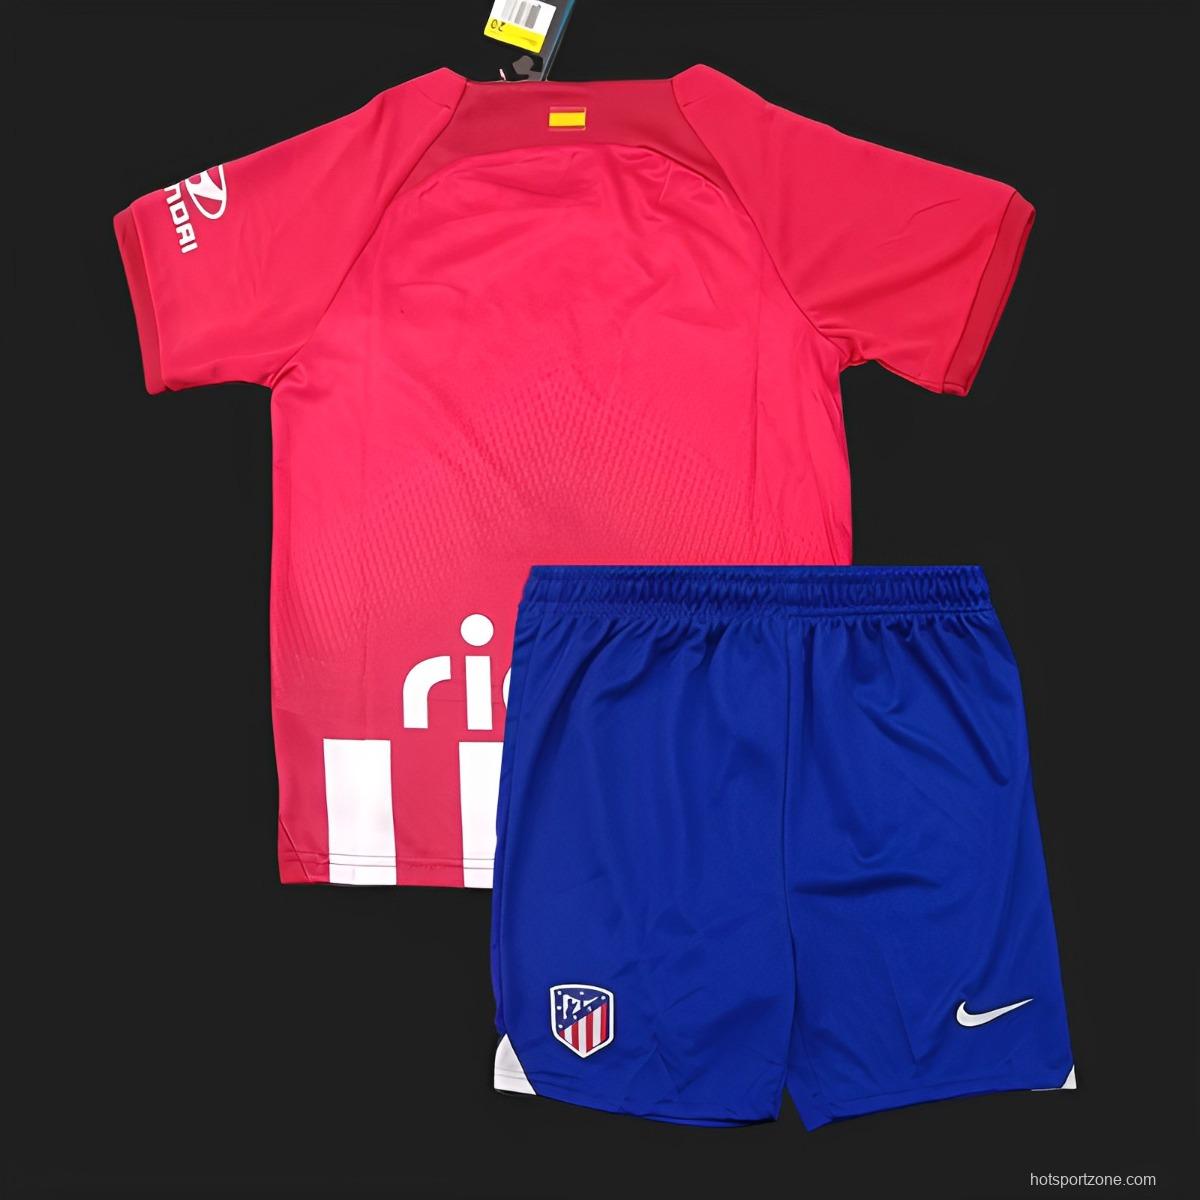 23/24 Kids Atletico Madrid Home Jersey